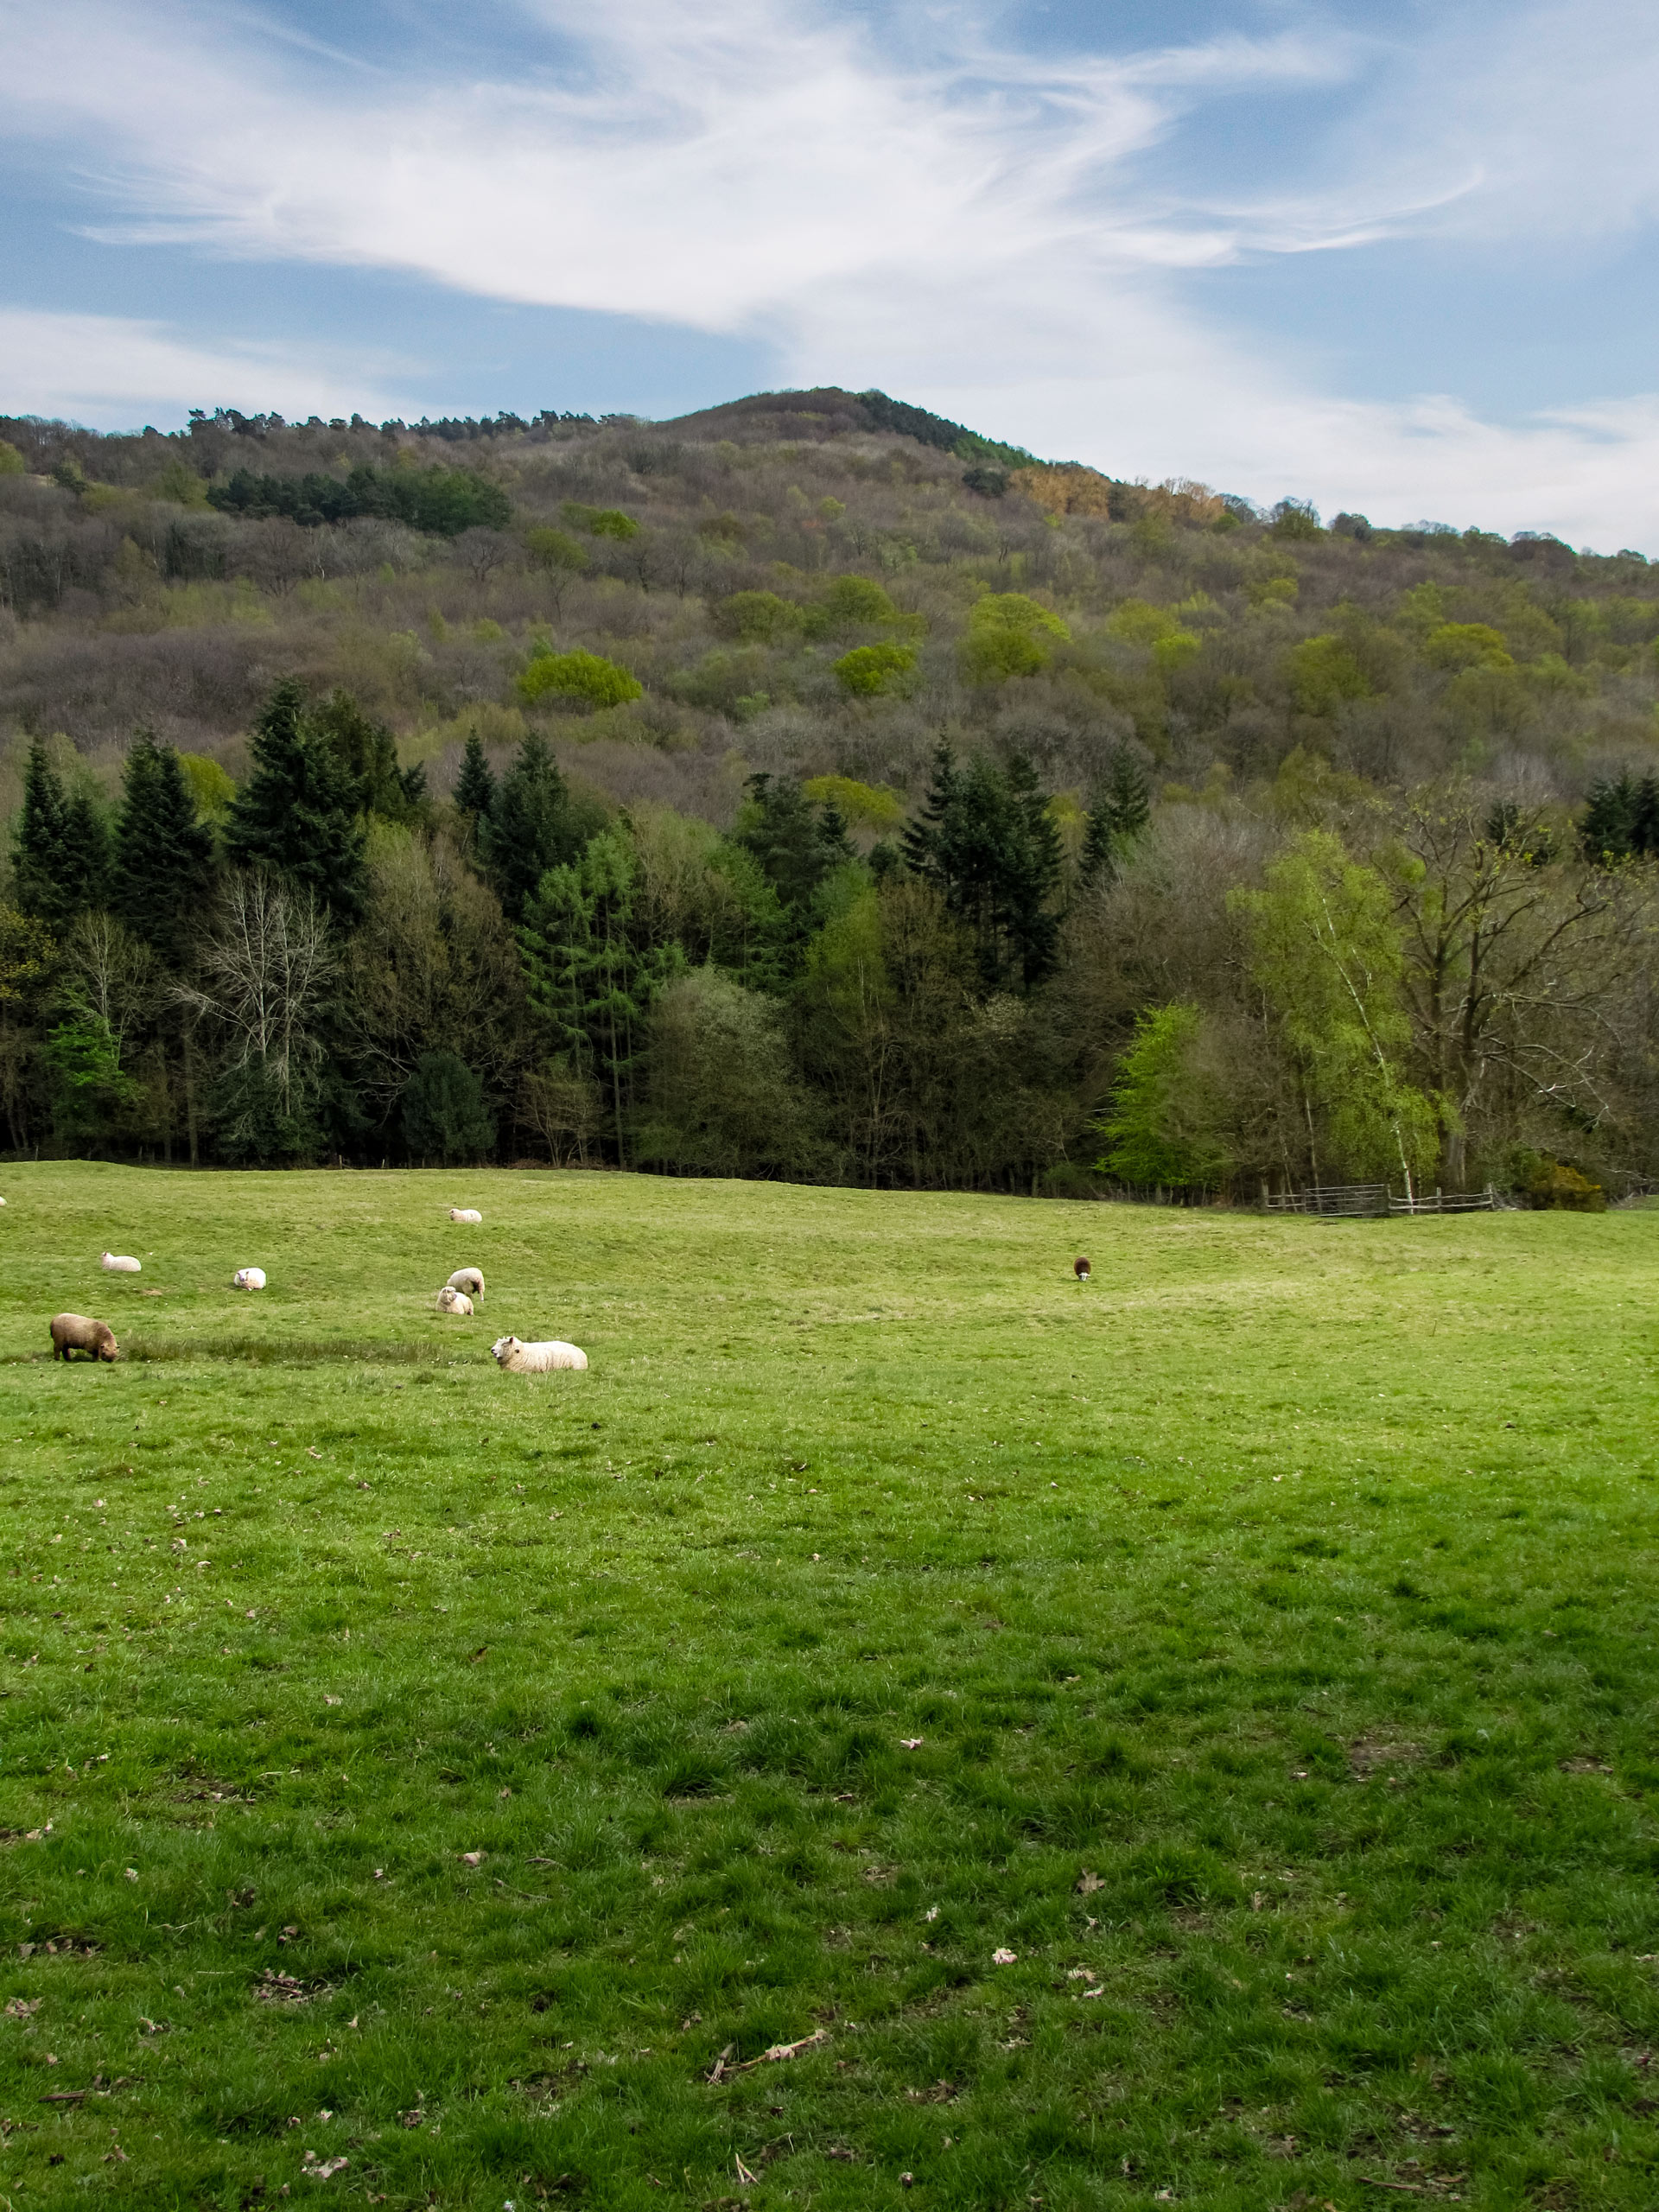 Sheep grazing in the field along Blackdown and Ridge Hill Walking South Downs UK